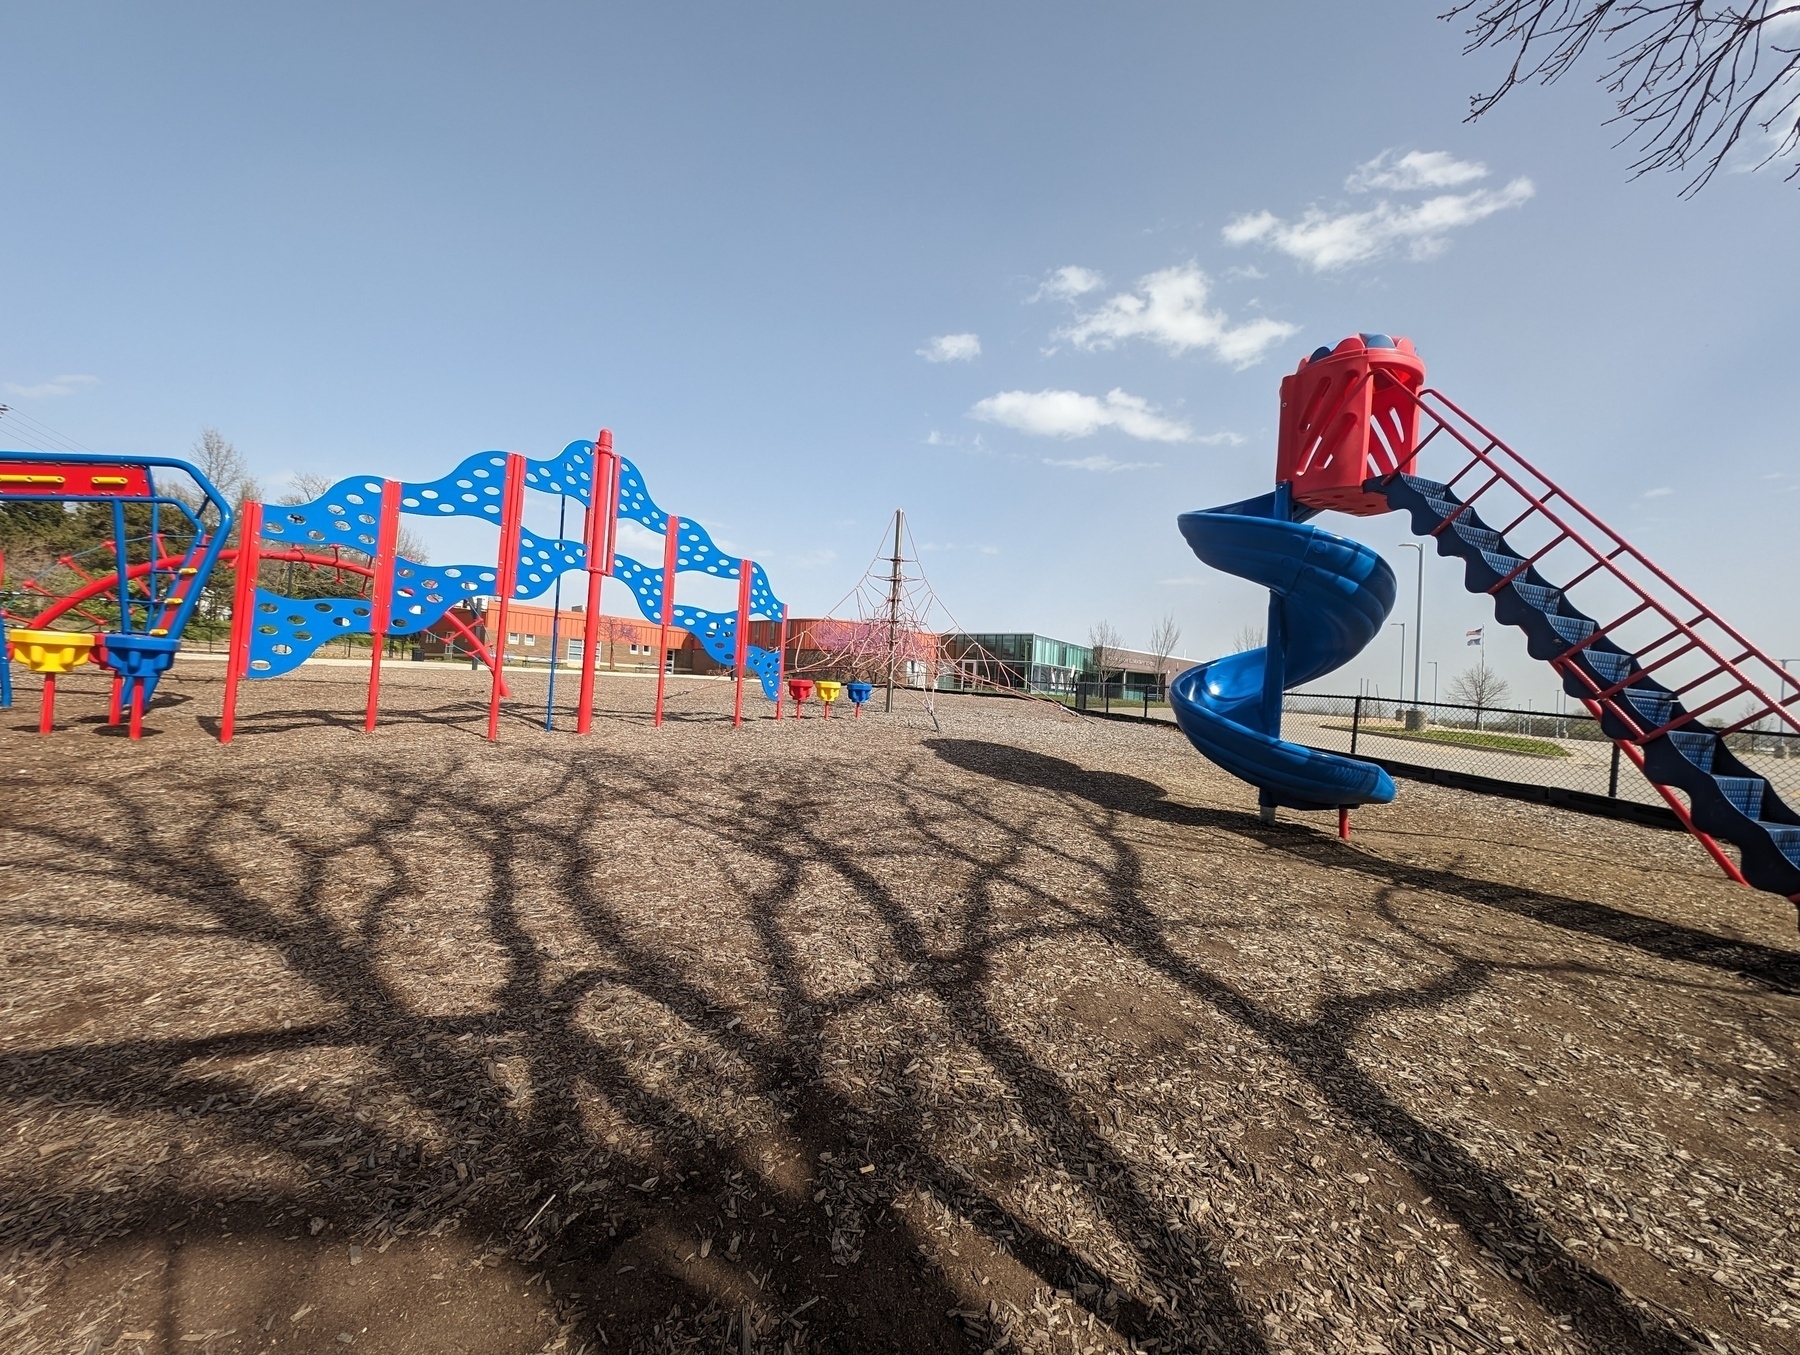 Photo of a local school playground. Red and blue jungle gym climbing equipment. The foreground features a windy tree shadow.